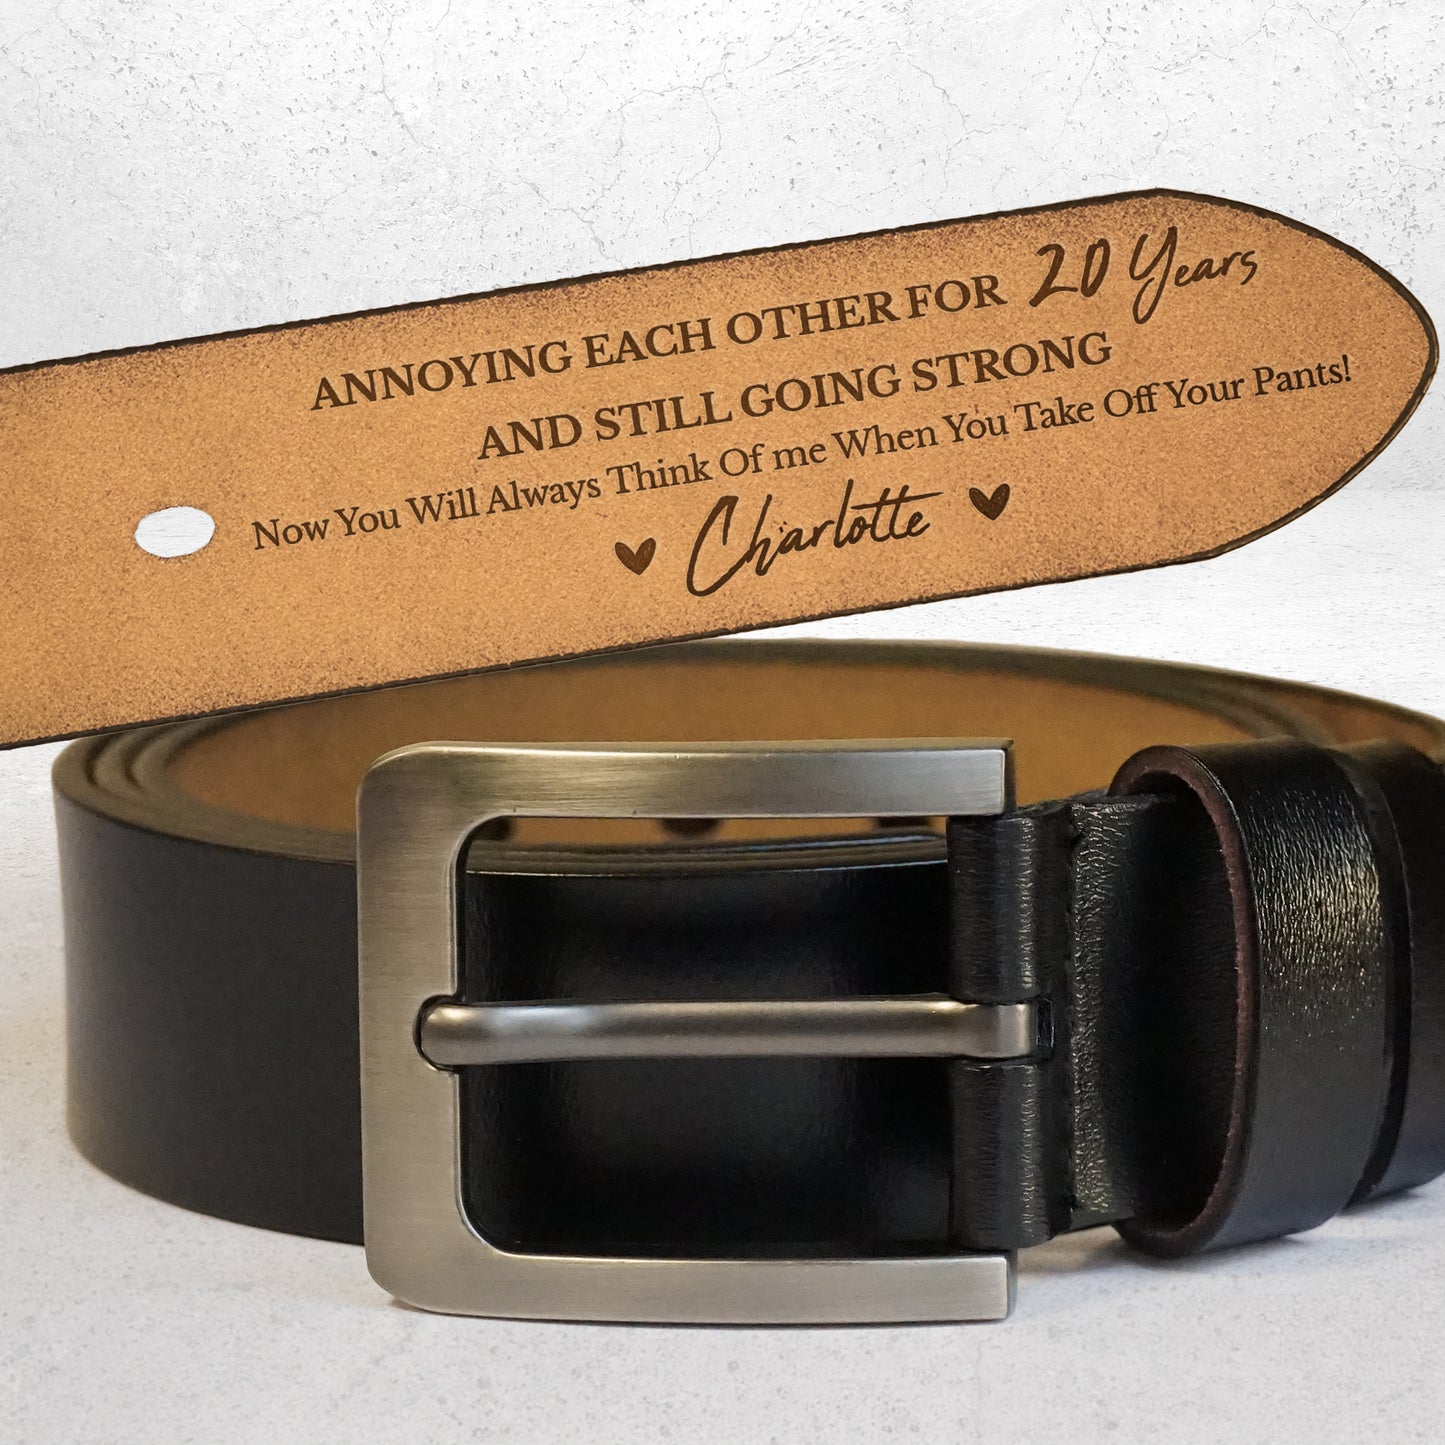 Annoying Each Other For Many Years - Personalized Engraved Leather Belt